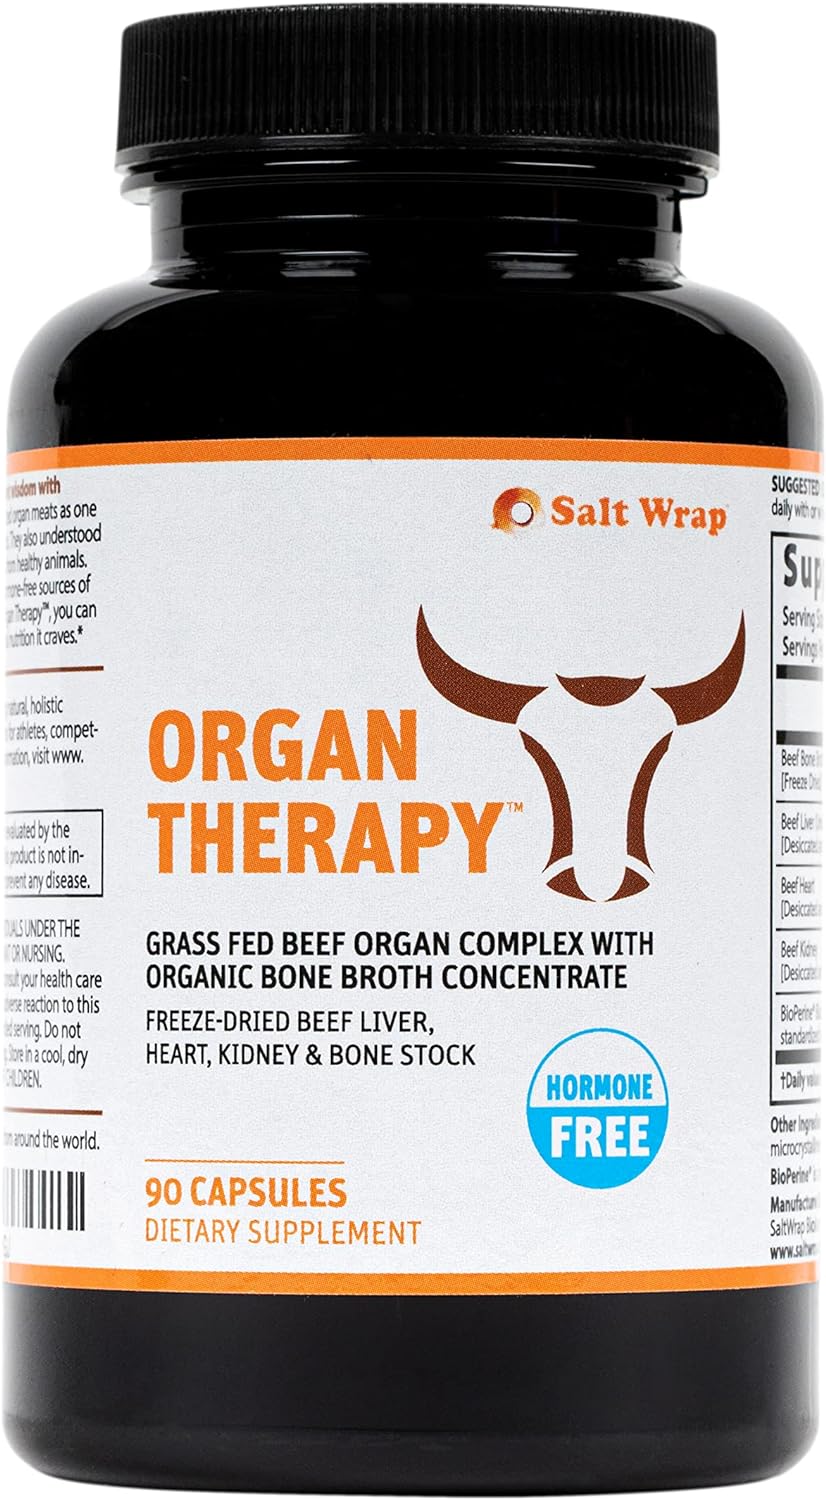 SaltWrap Organ Therapy Grass Fed Beef Liver 90 Capsulas